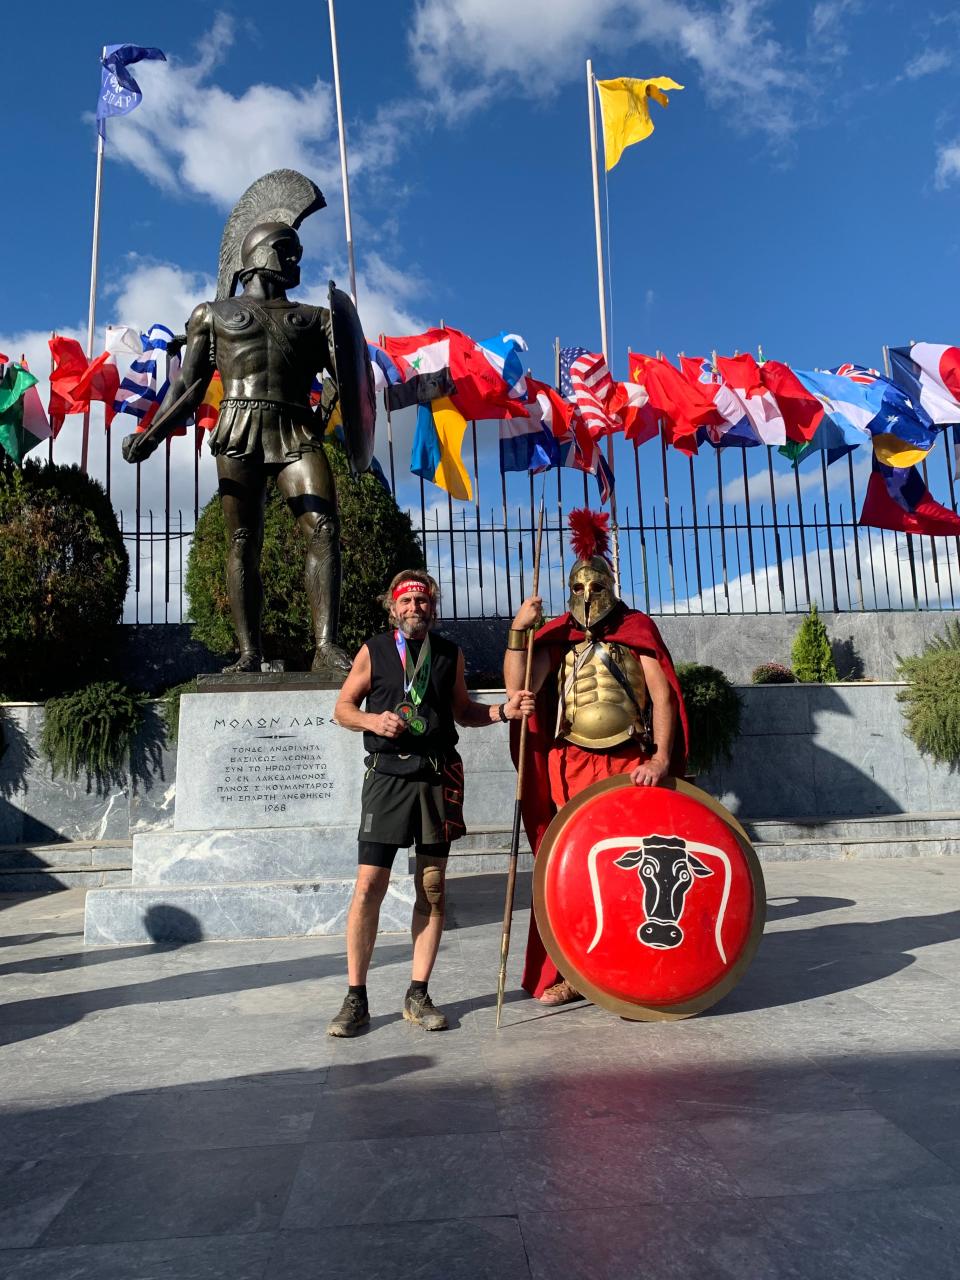 Mark Seeley standing next to a man dressed as a Trojan soldier as he completes the Tri-Fecta in Sparta, Greece.